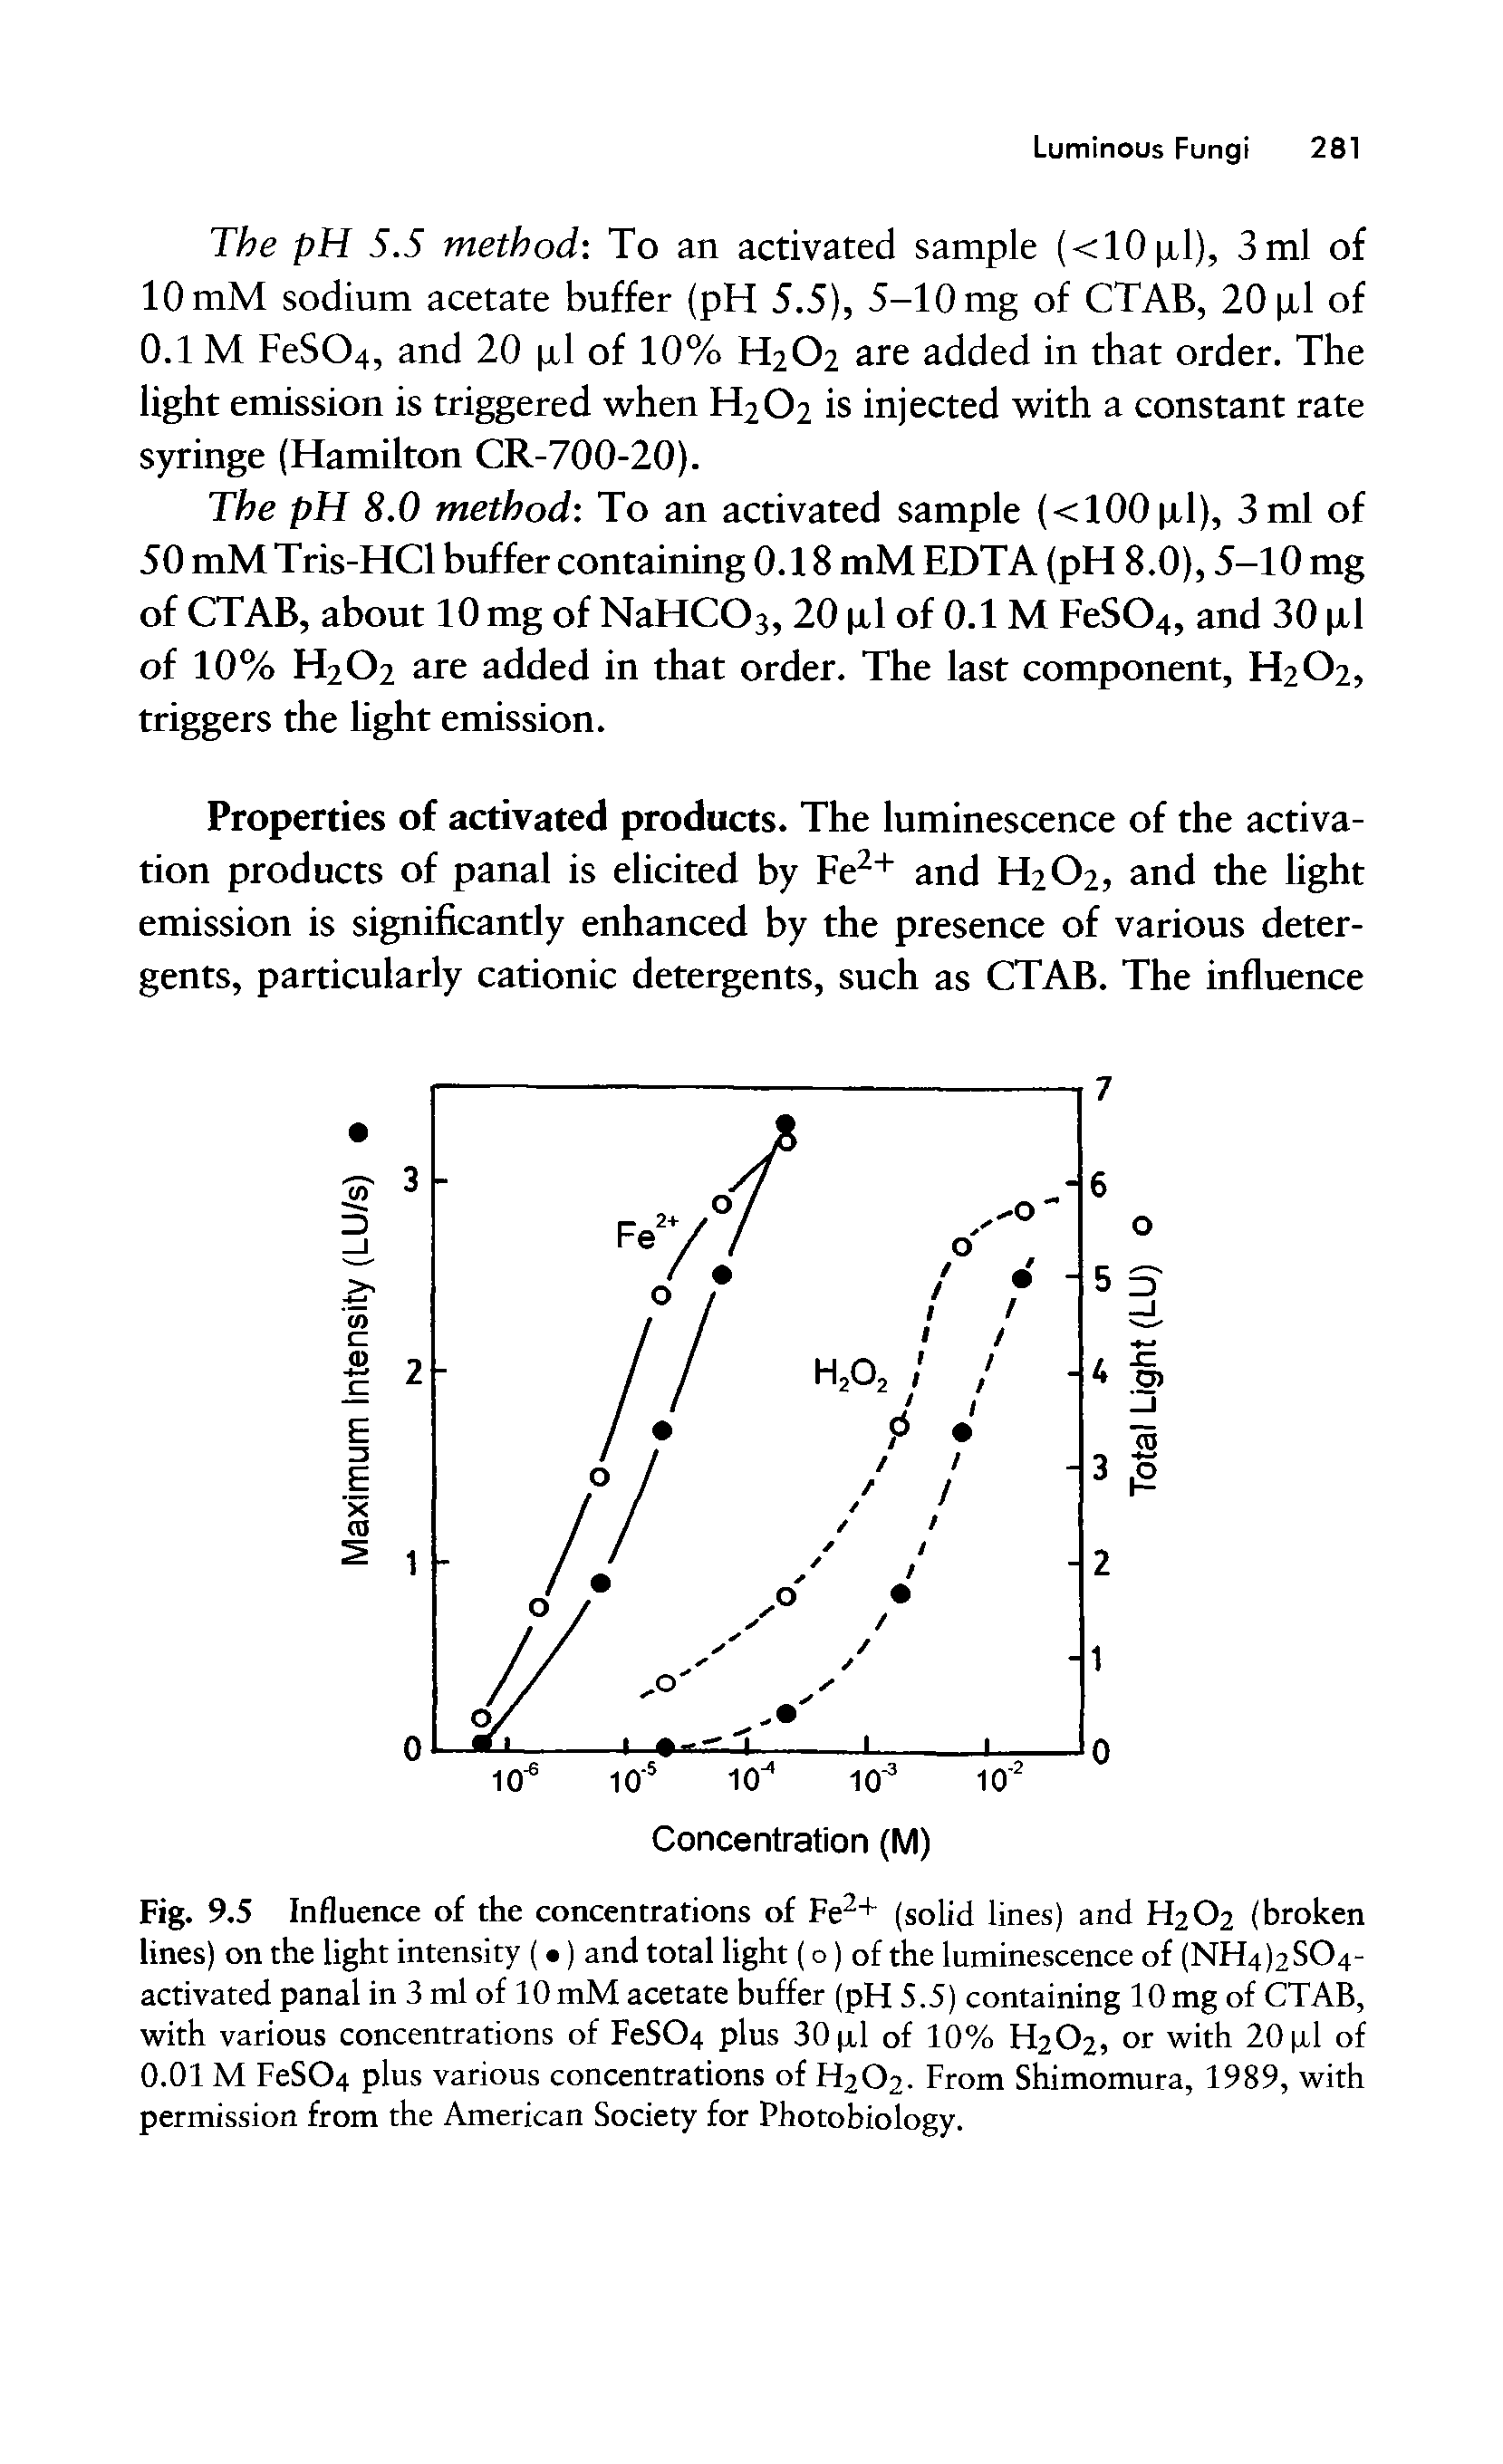 Fig. 9.5 Influence of the concentrations of Fe2+ (solid lines) and H2O2 (broken lines) on the light intensity ( ) and total light (o) of the luminescence of (NH4)2S04-activated panal in 3 ml of 10 mM acetate buffer (pH 5.5) containing 10 mg of CTAB, with various concentrations of FeS04 plus 30 jxl of 10% H2O2, or with 20 il of 0.01 M FeS04 plus various concentrations of H2O2. From Shimomura, 1989, with permission from the American Society for Photobiology.